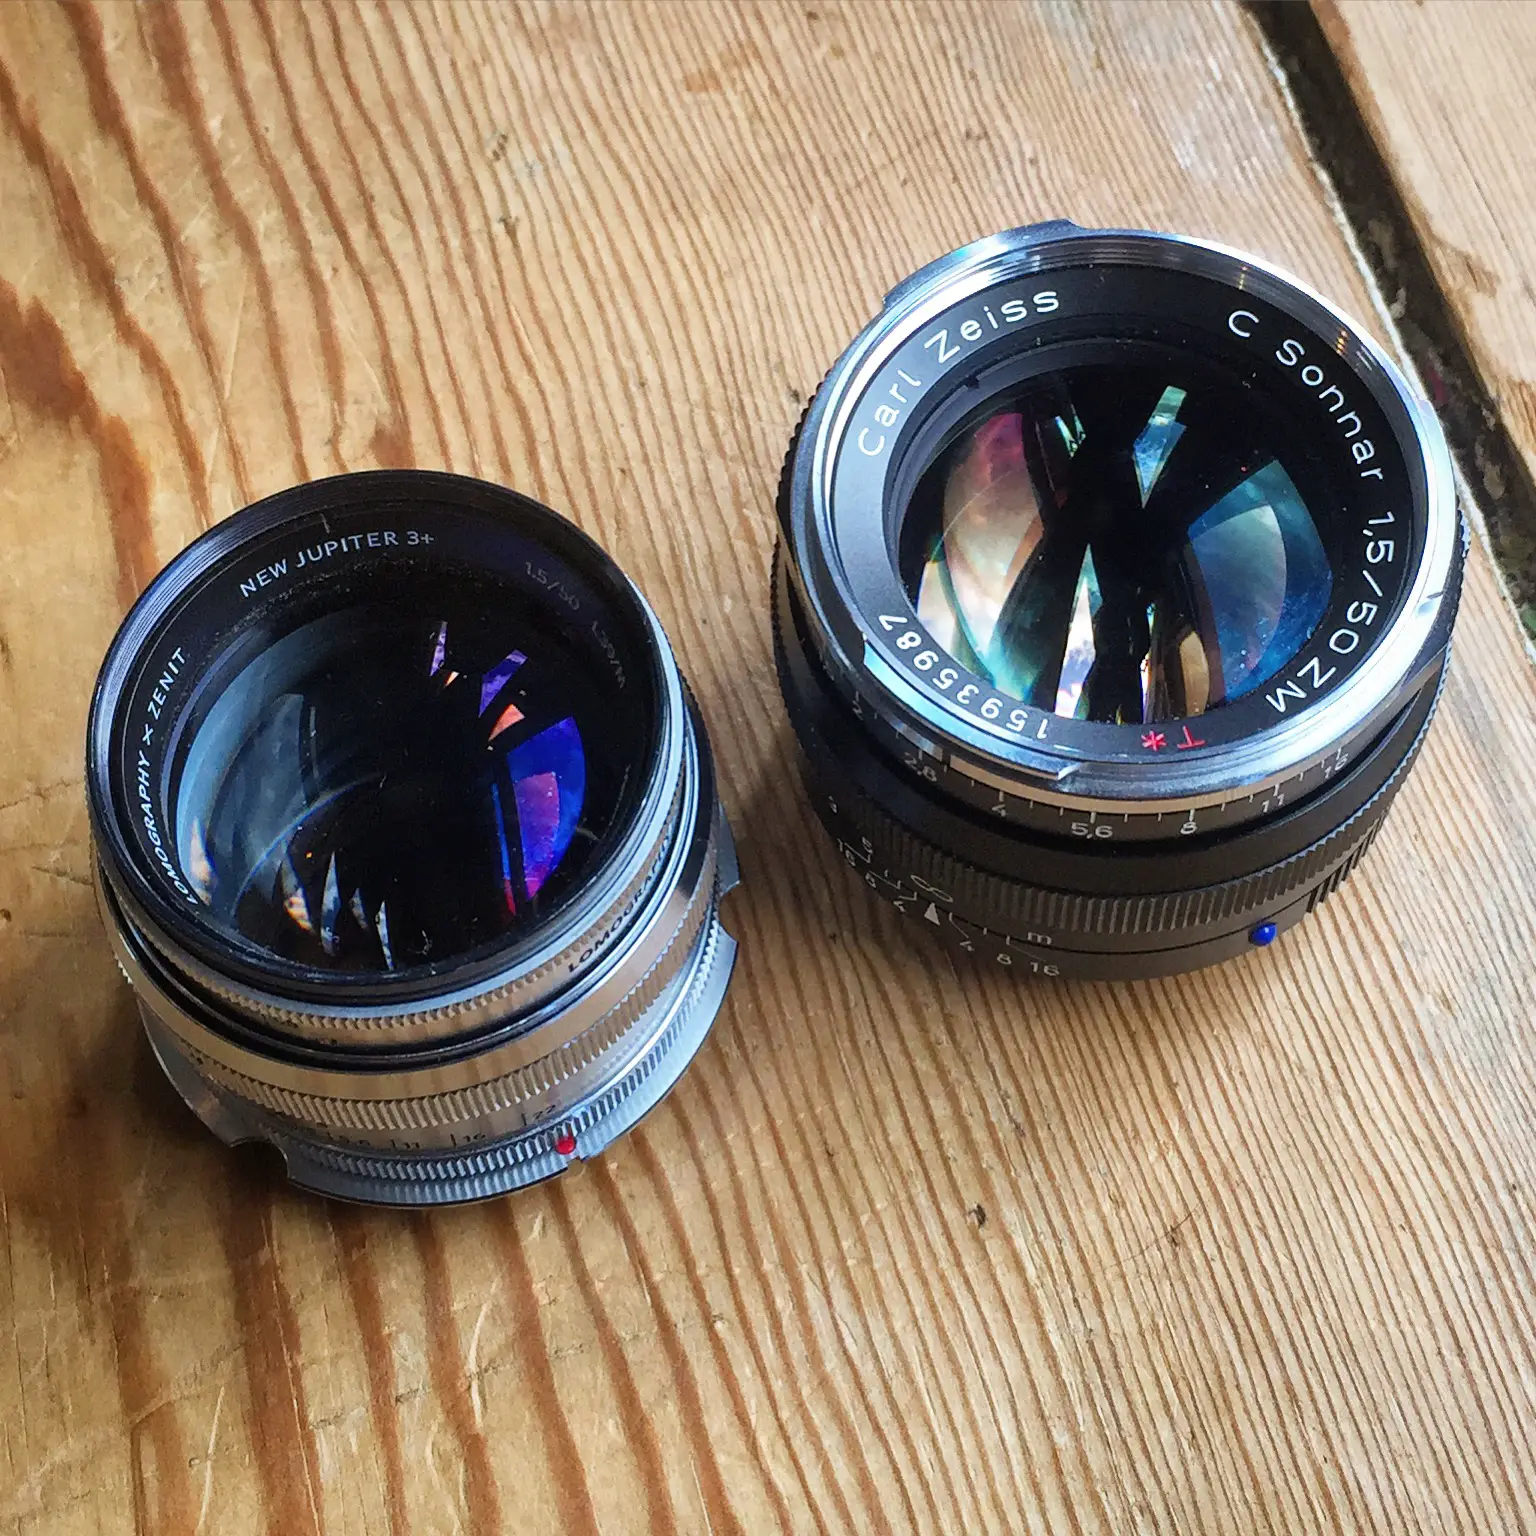 The new Jupiter 3+ Next to the Zeiss ZM Sonnar